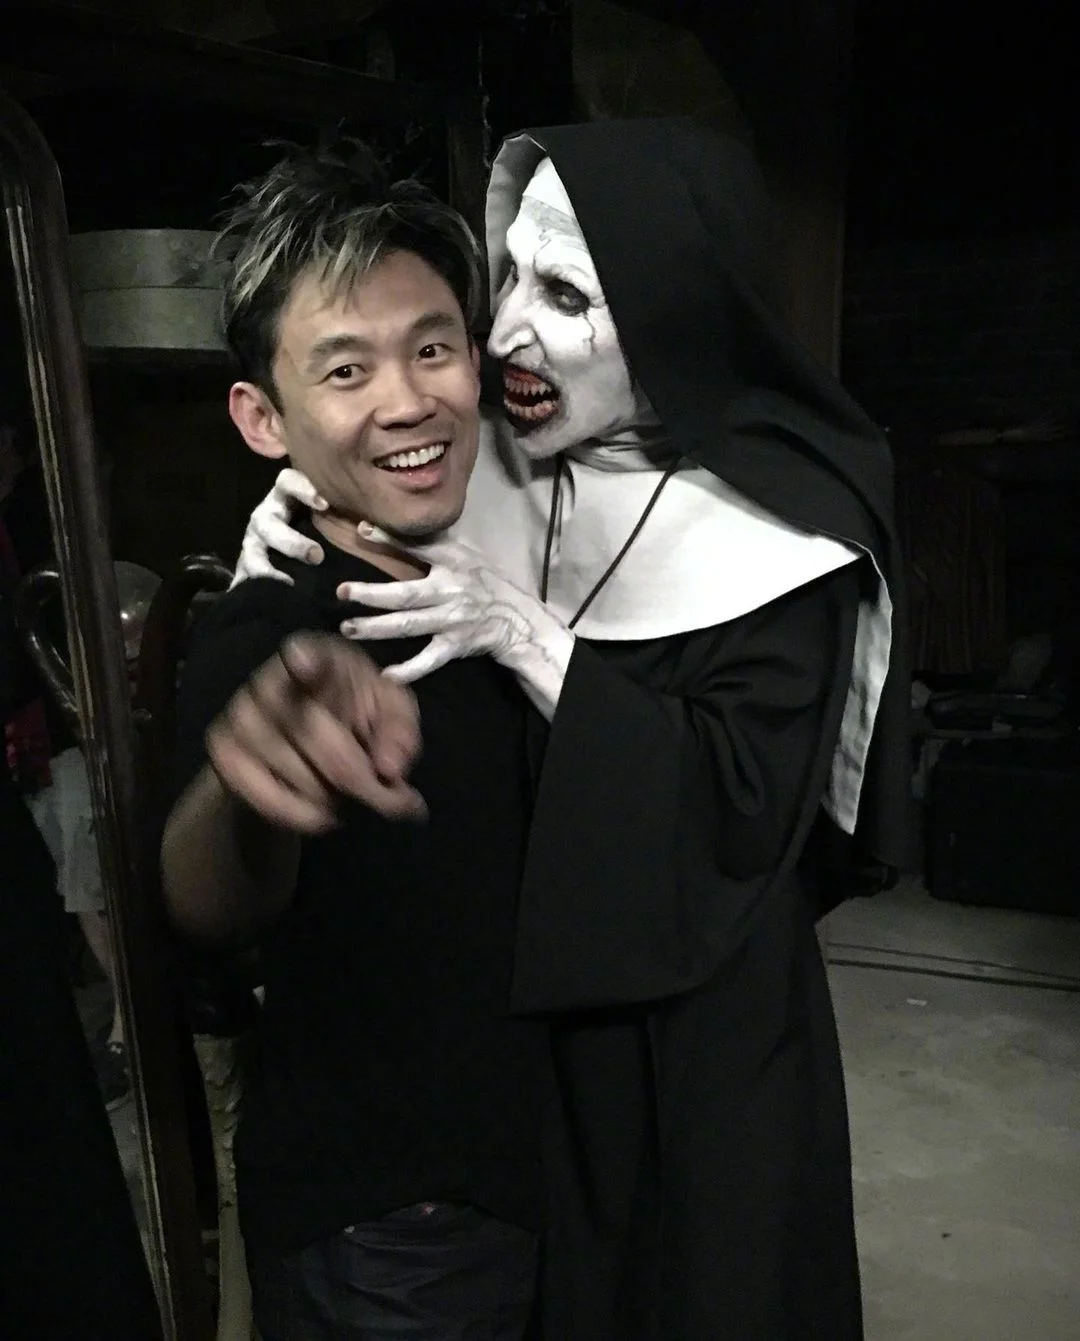 James Wan posted on Instagram that "The Nun 2‎" is preparing to start filming